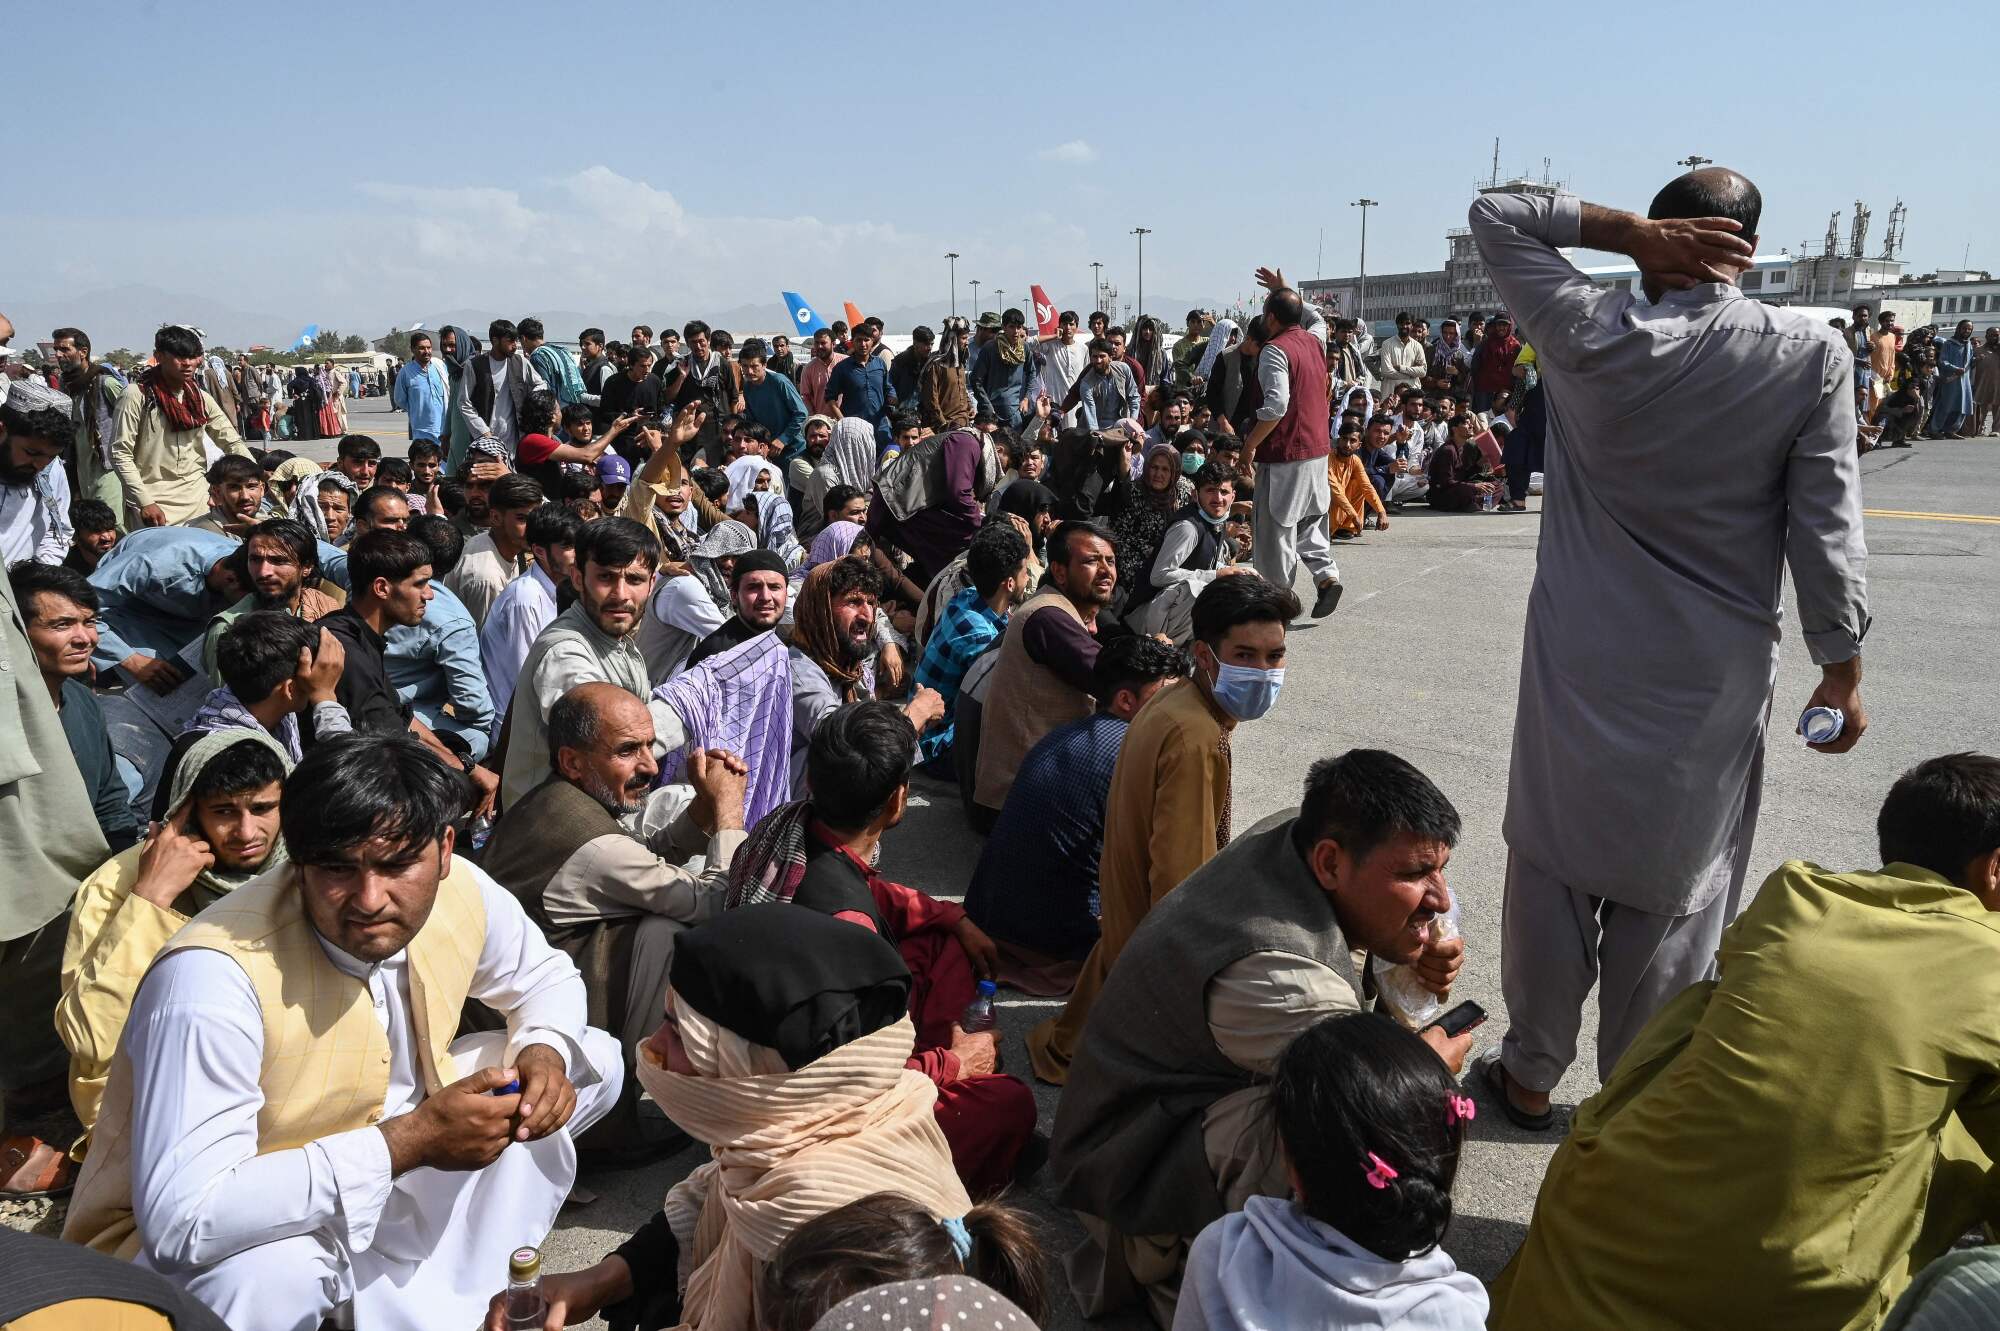 A large group of Afghans sits on paved ground 